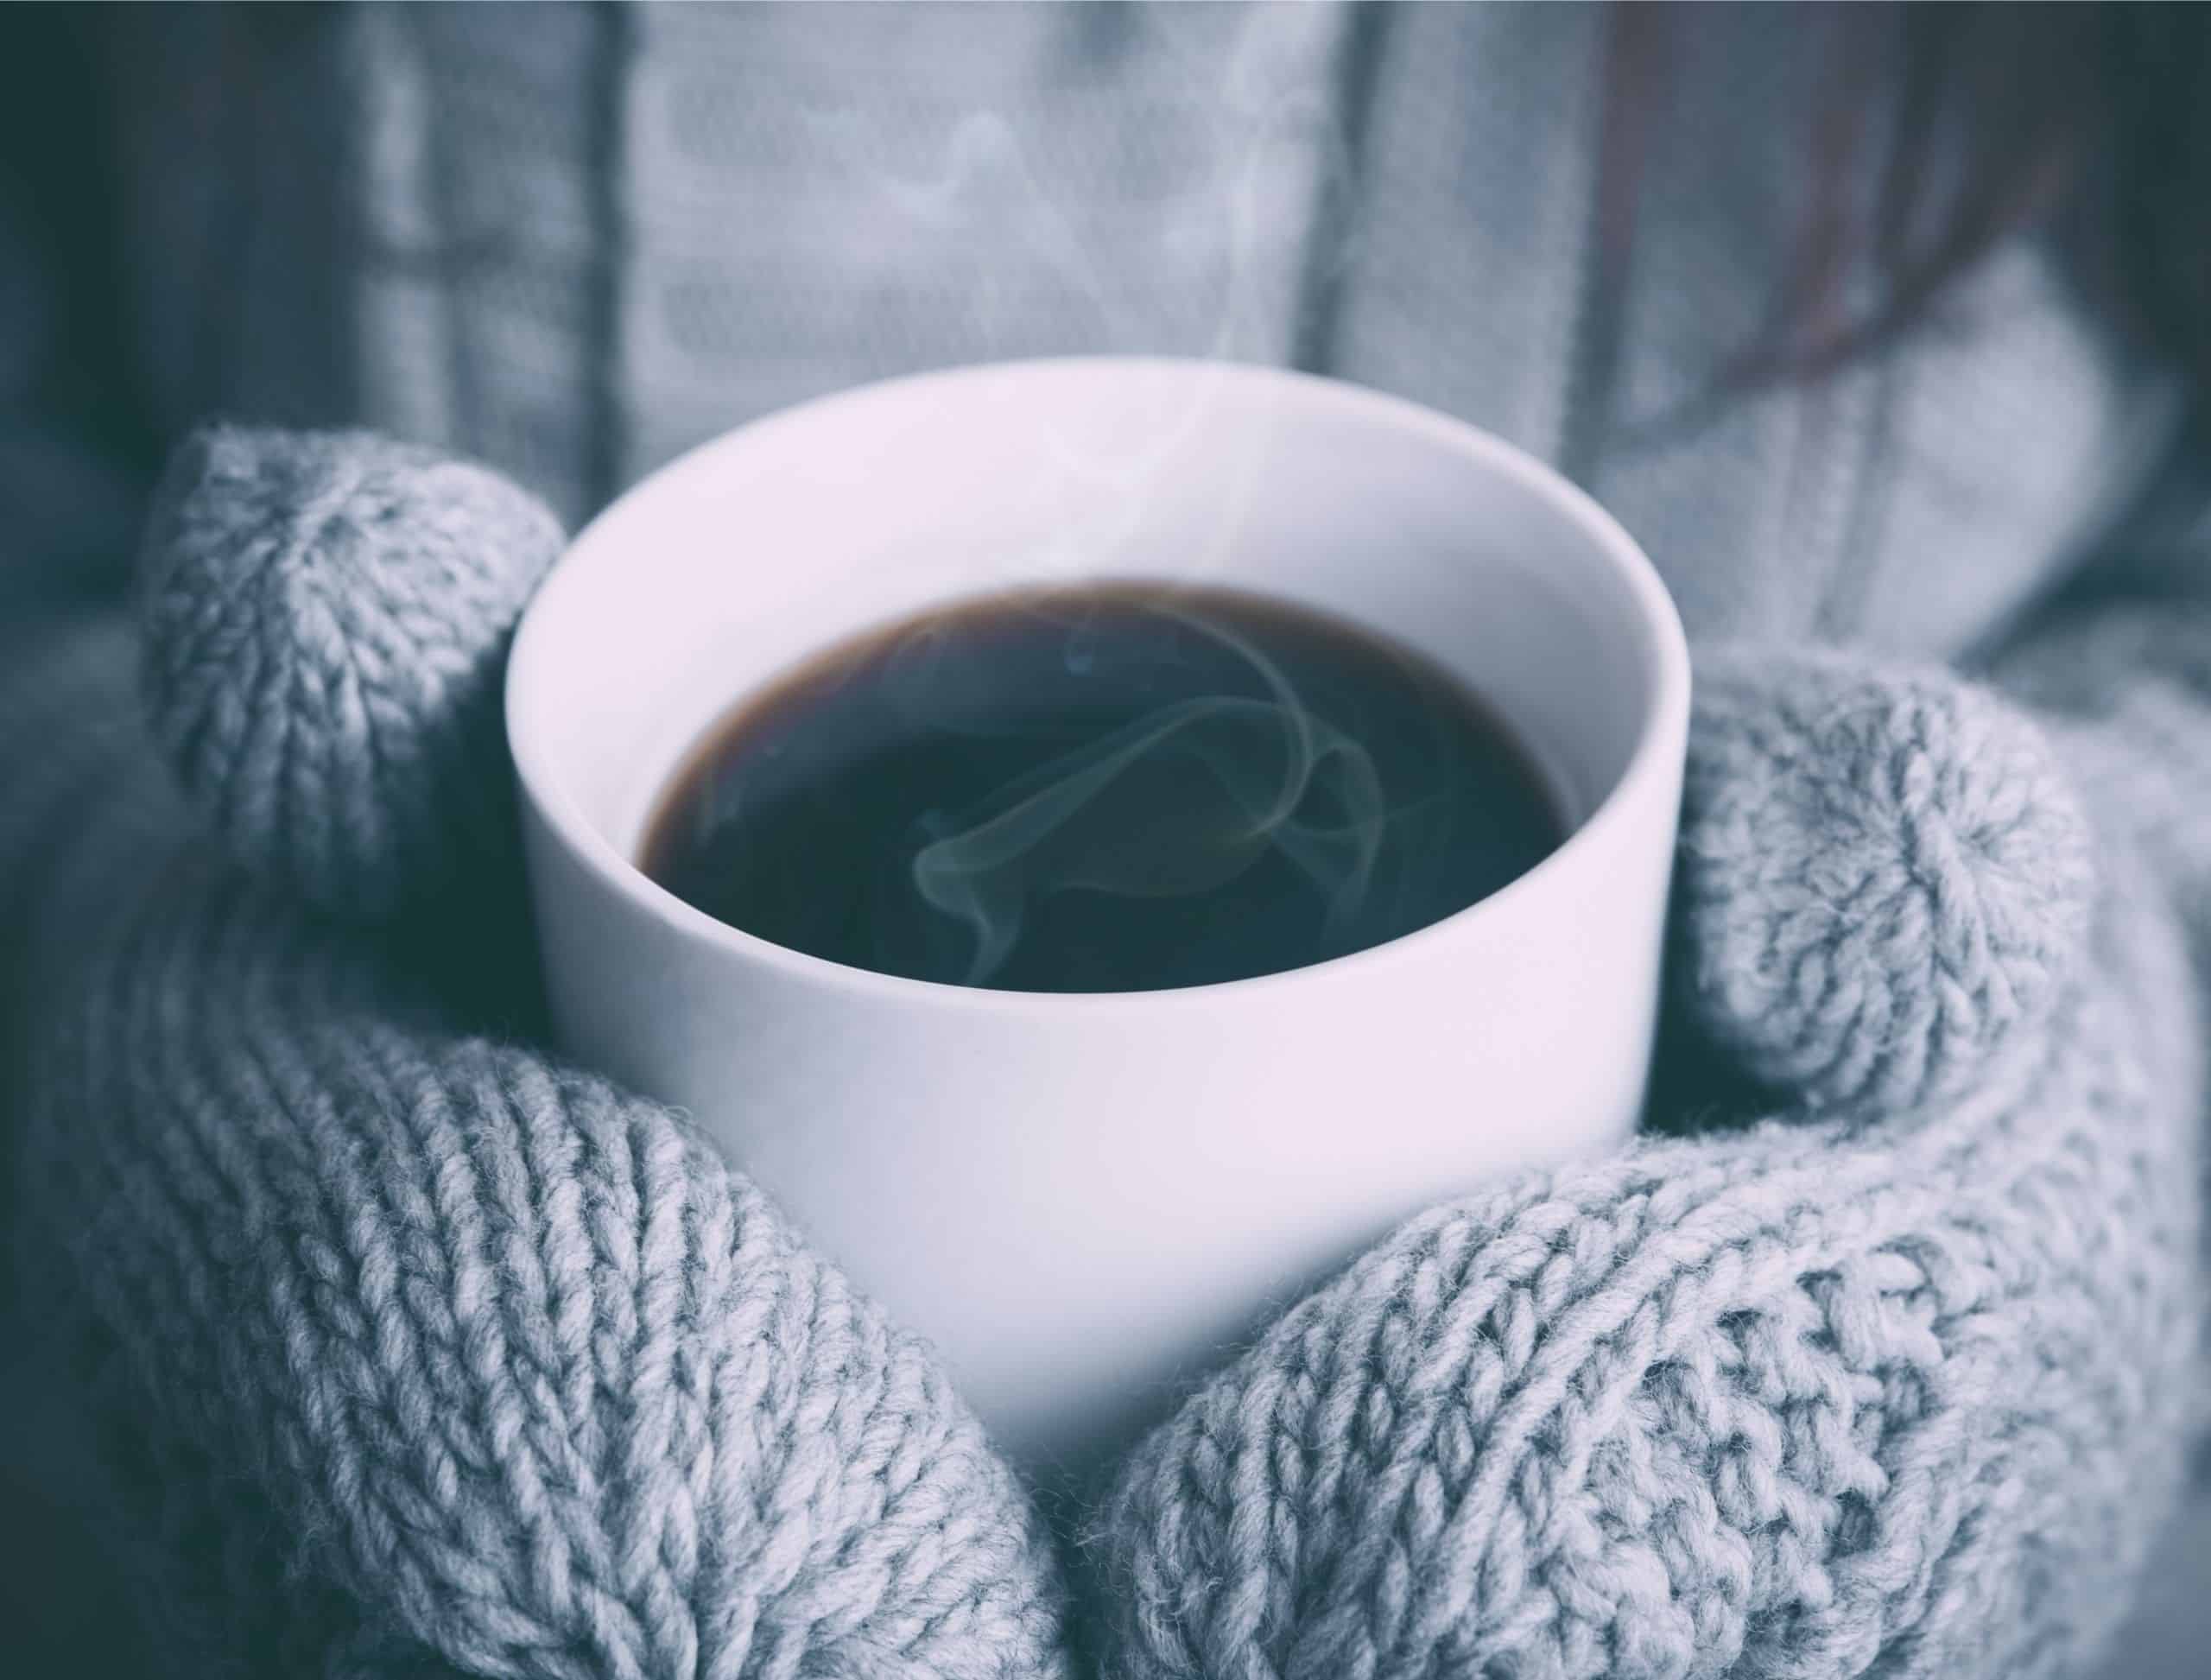 Cold mitten hands holding cup of coffee